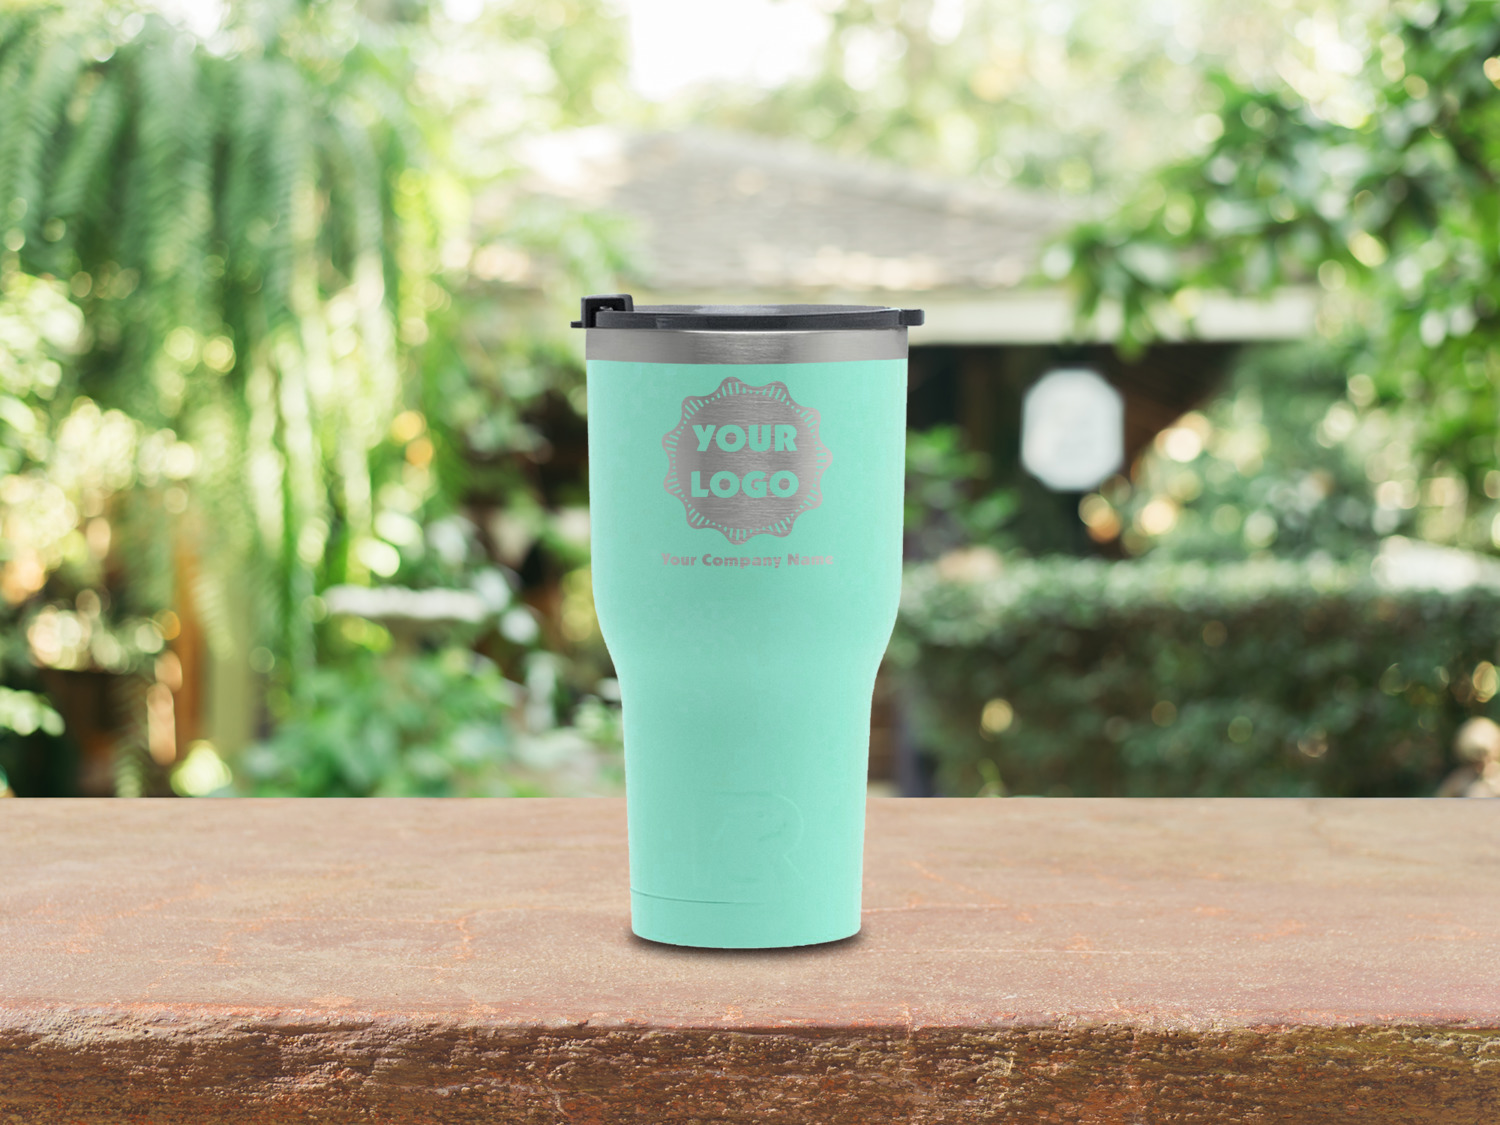 https://www.youcustomizeit.com/common/MAKE/638421/Logo-Company-Name-Teal-RTIC-Tumbler-Lifestyle-Front.jpg?lm=1686953251